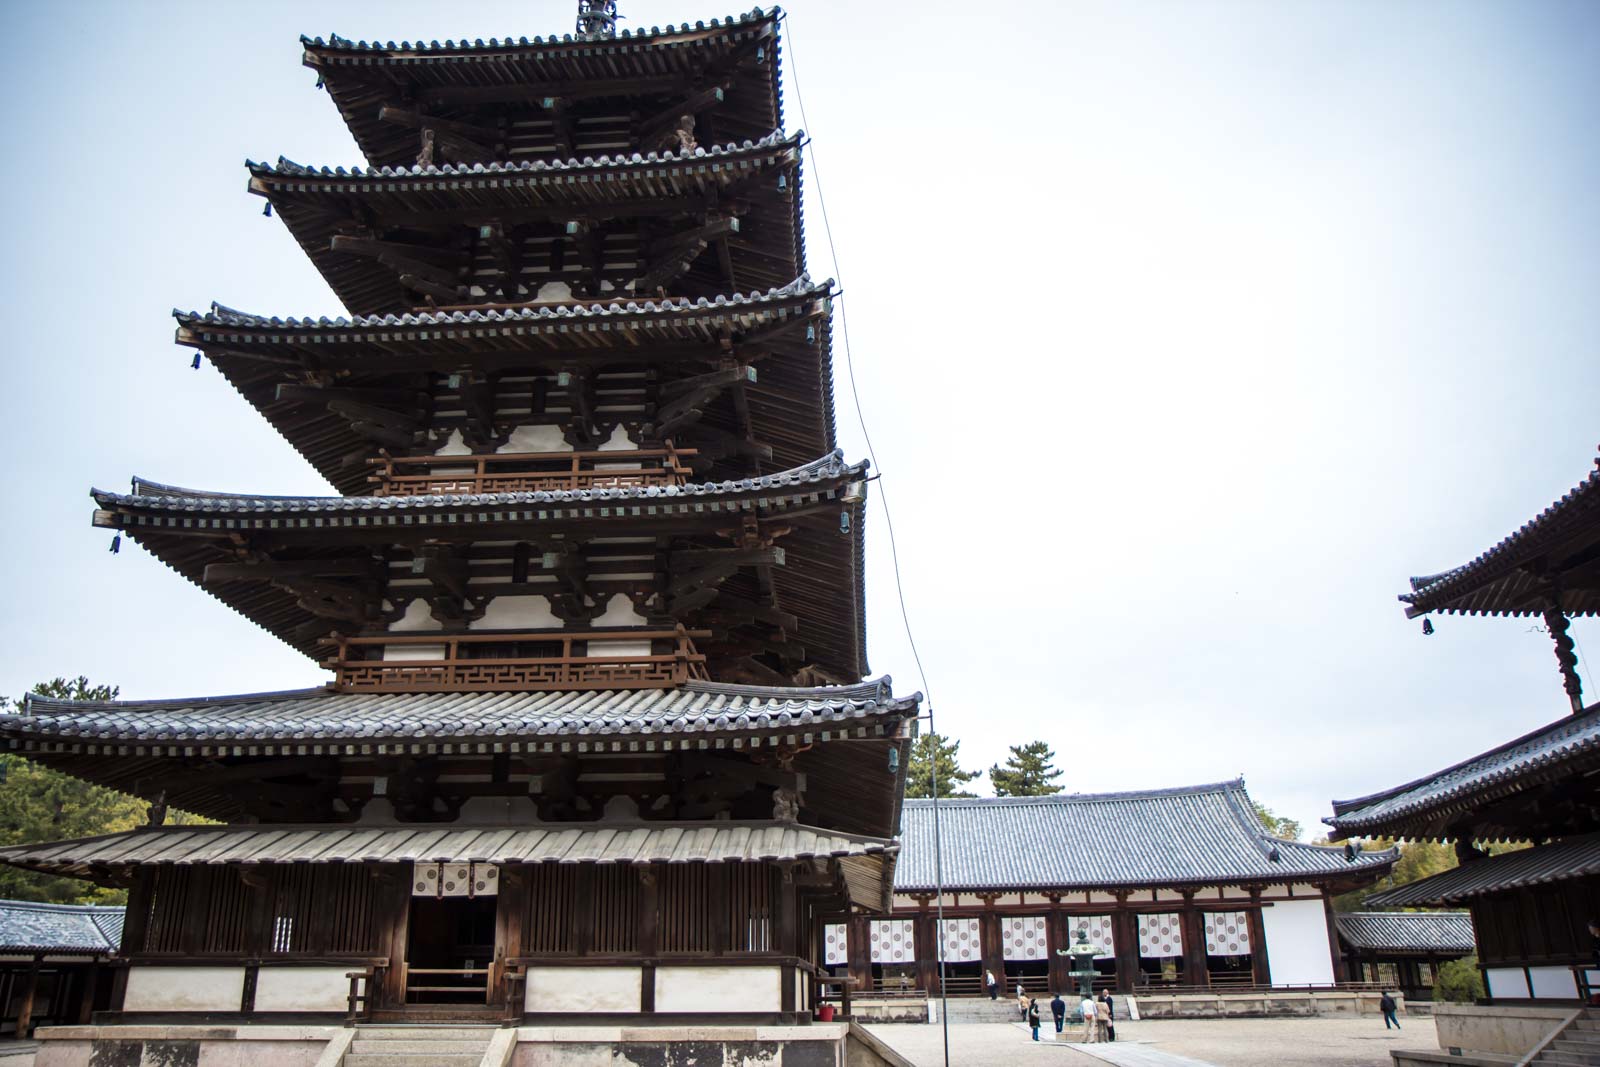 Nara Layout Horyuji Temple Japan The world s oldest wooden building